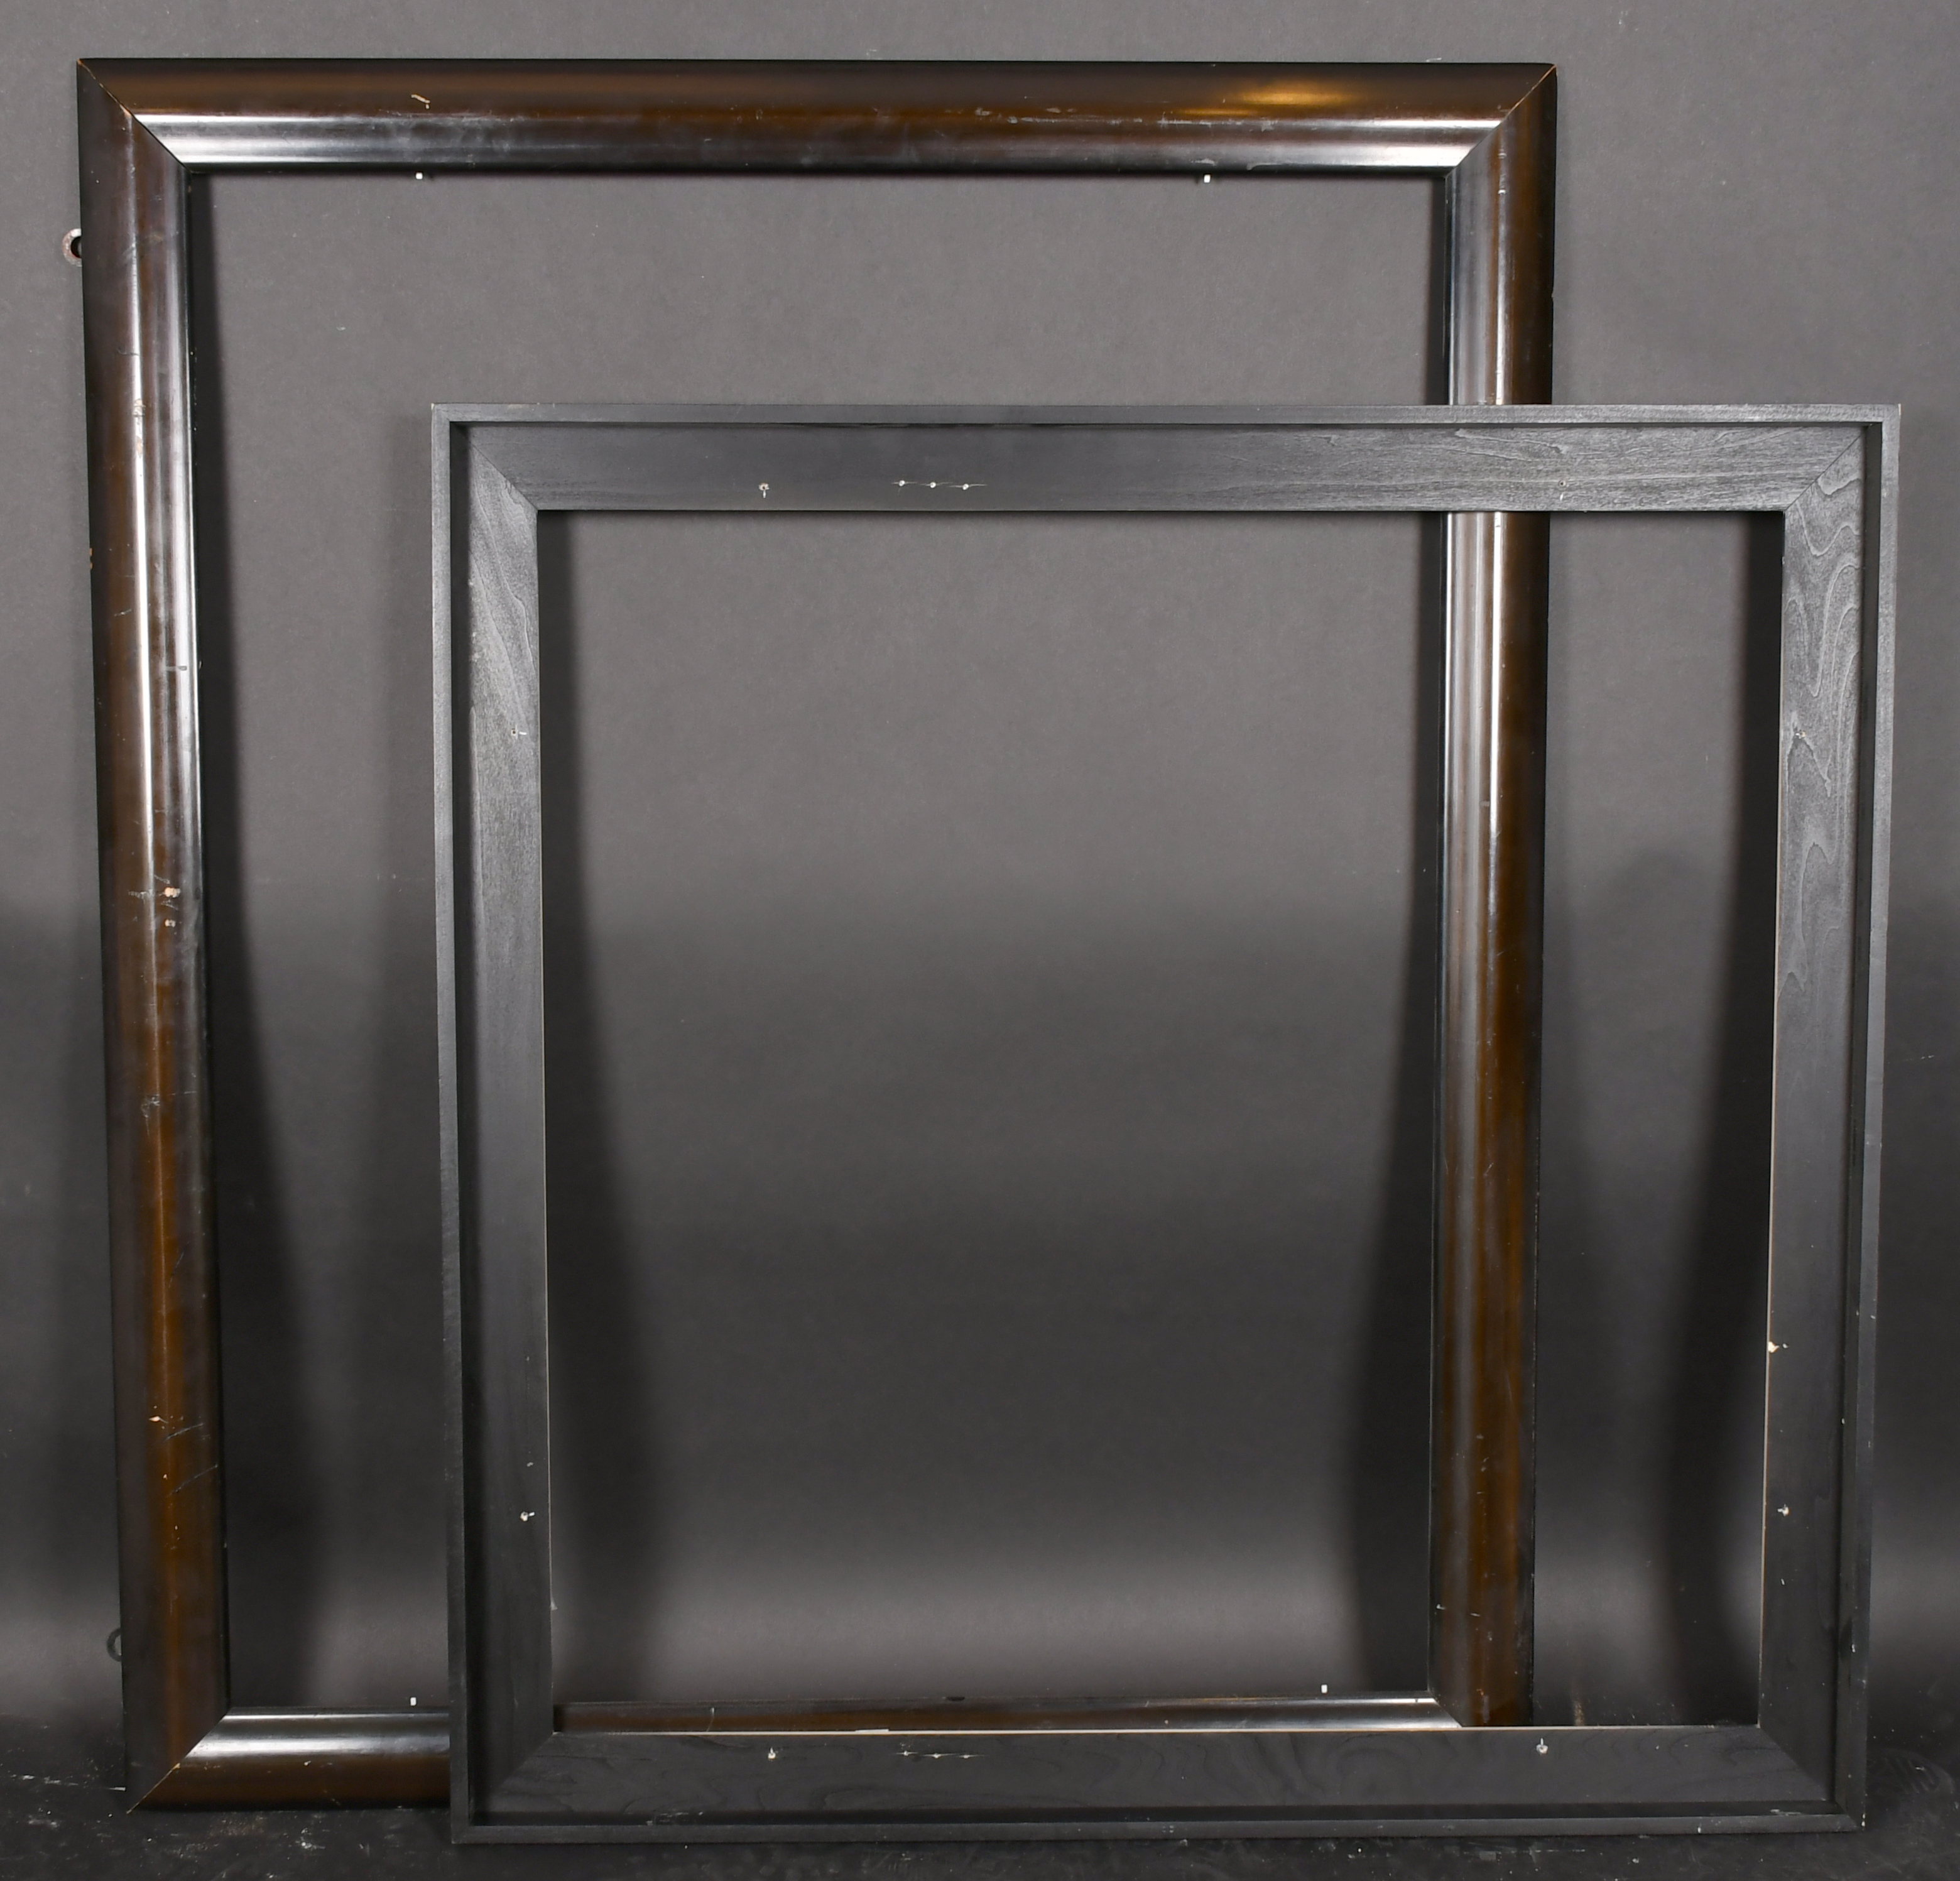 Early 20th Century European School. A Black Painted Frame, rebate 41.25" x 33.25" (104.8 x 84.4cm) - Image 2 of 3